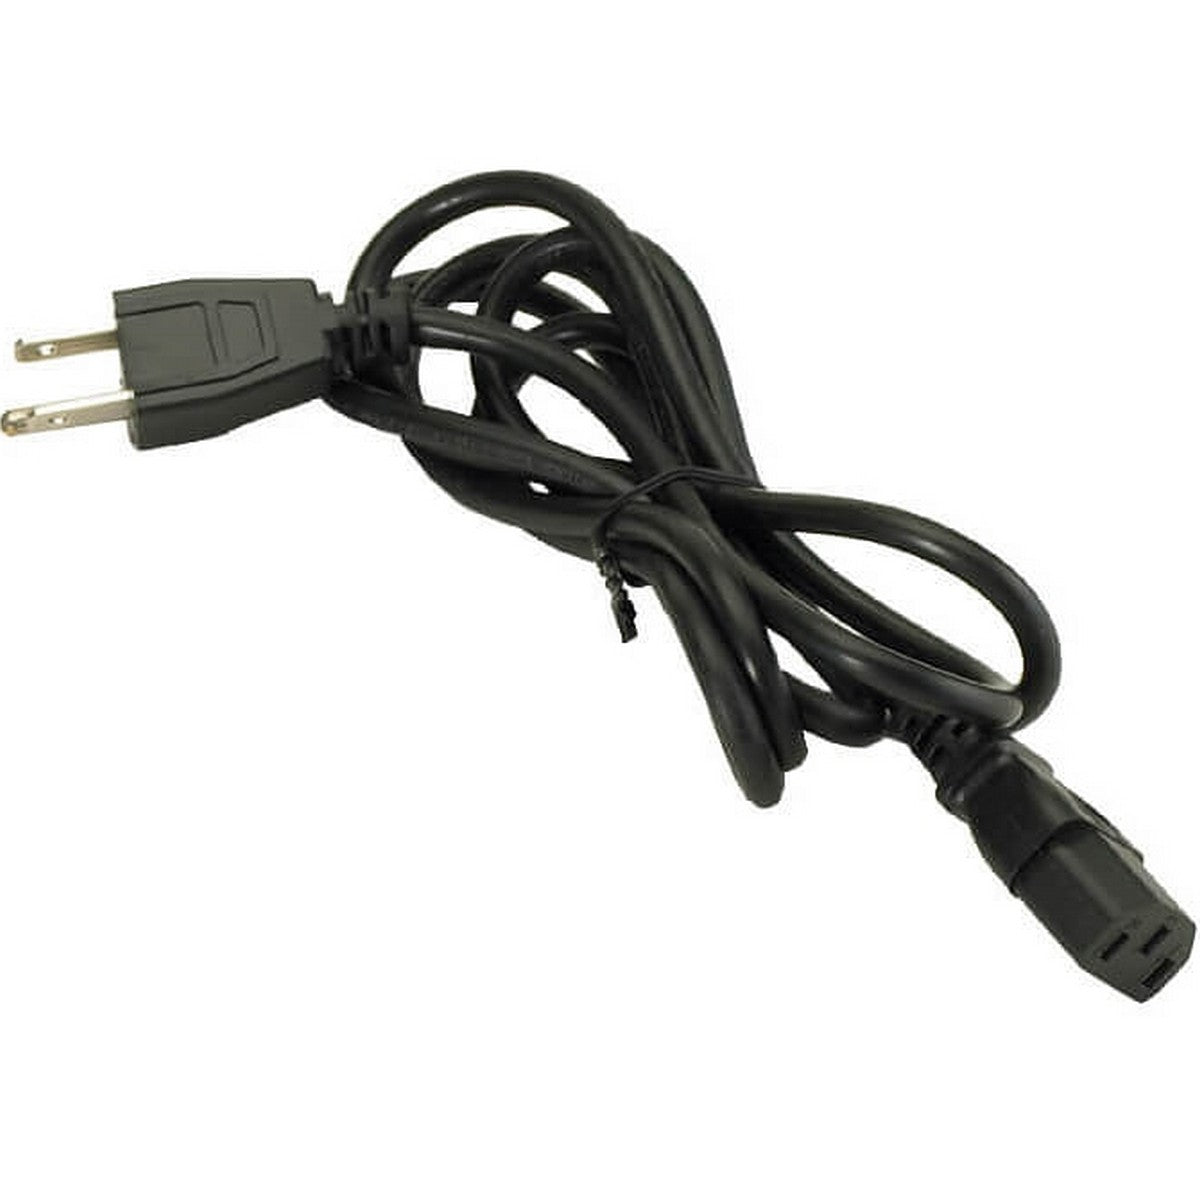 Litepanels Standard 6 ft US Power Cord | Power Supply Cord for 1x1 Astra 1x1 Fresnels Hilio 900-0003